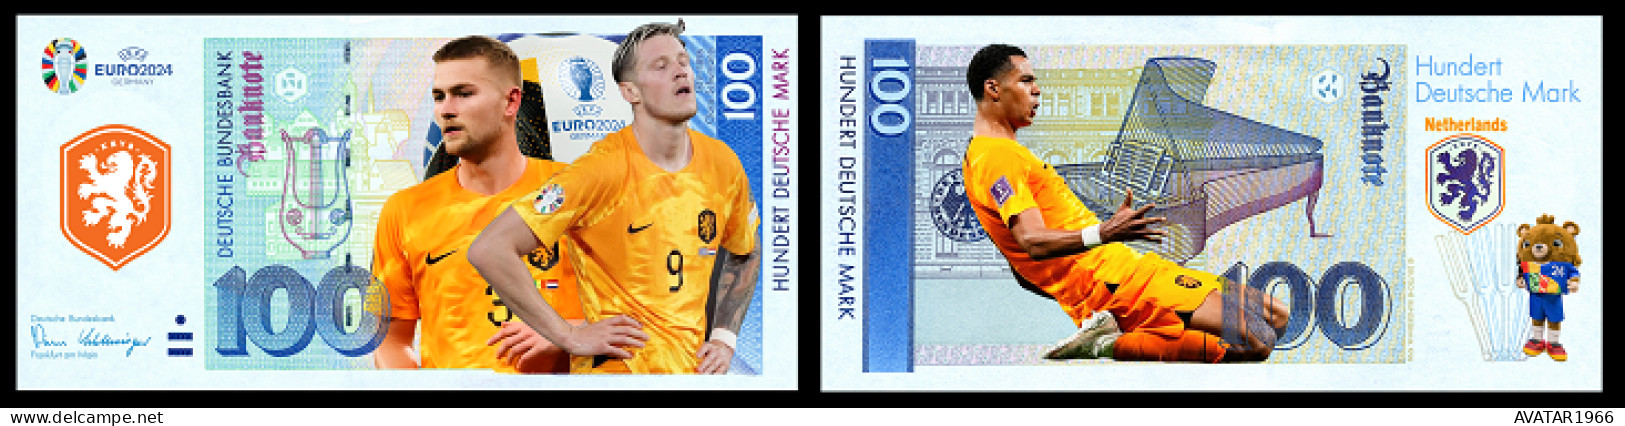 UEFA European Football Championship 2024 qualified country Netherlands 8 pieces Germany fantasy paper money